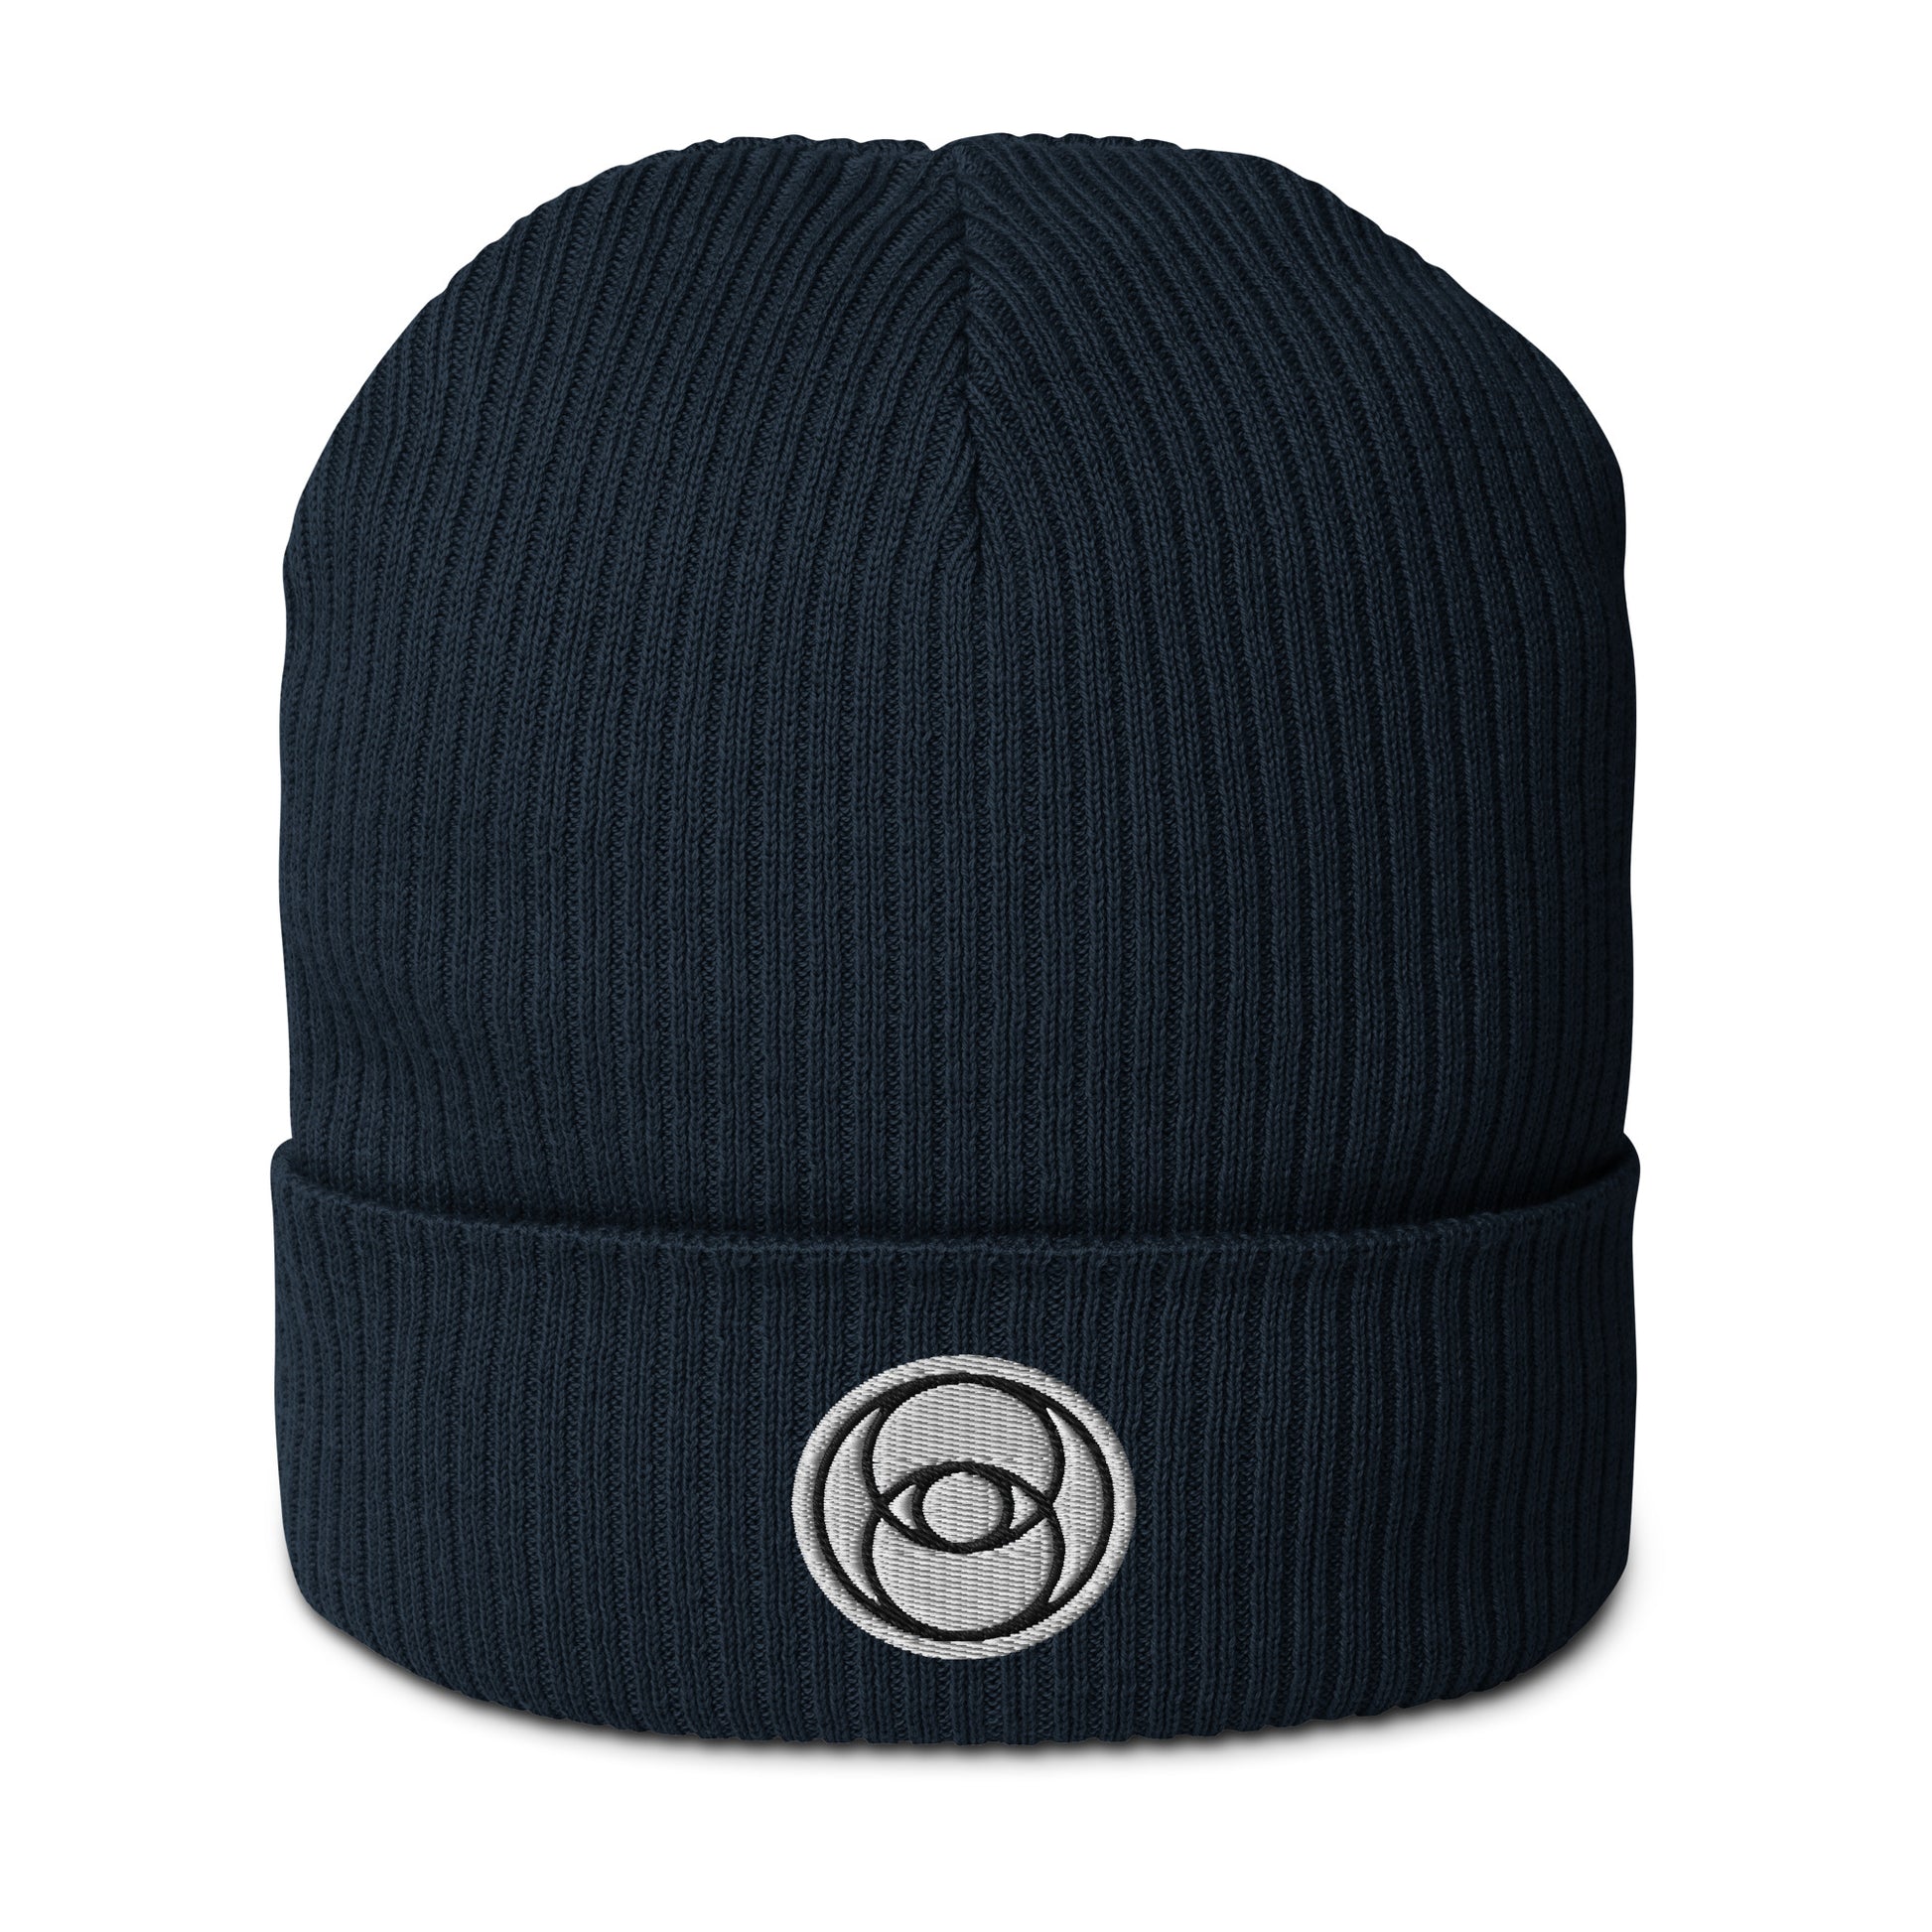 The Vesica Piscis Organic Cotton Beanie in Oxford Navy is all about harmonious unions. Made of organic cotton and featuring a Vesica Piscis embroidery, this piece is something special. The Vesica Piscis symbolizes unity, balance, and connecting with the universe. Our beanies are made with breathable, lightweight fabric and natural materials, so you can stay comfy while you're exploring the mysteries of existence. Grab one of these beanies and add a touch of divinity to your style.